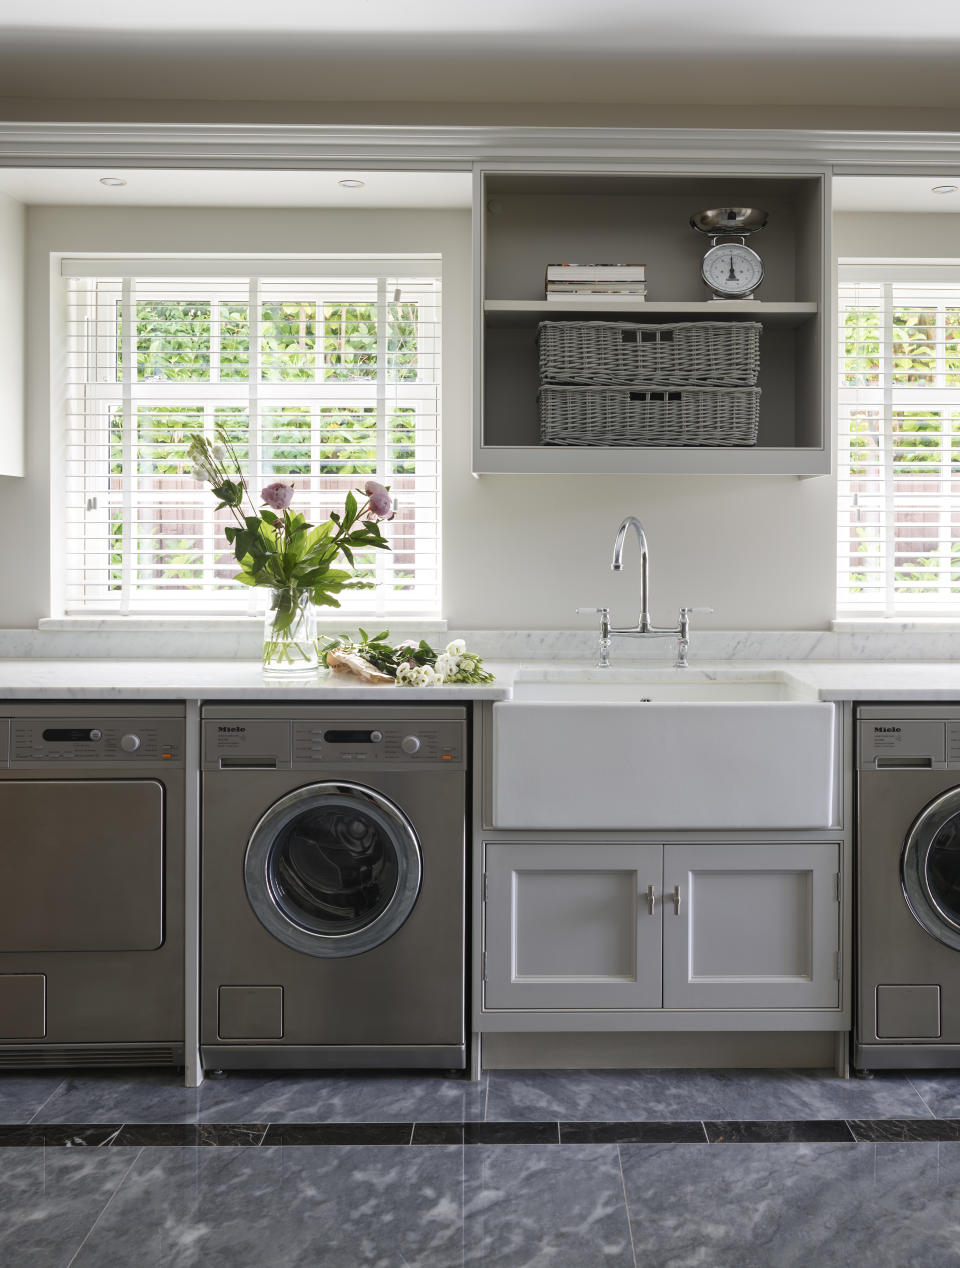 <p> A sink of generous proportions could be a good choice for a utility room with the uses it&#x2019;s put to different from those in the kitchen.&#xA0; </p> <p> &#x2018;A butler sink is a good choice for a utility room as it&#x2019;s deep enough to soak laundry in, clean dirty boots in and, due to the ceramic finish, it is also very easy to keep clean,&#x2019; says Richard Davonport, Managing&#xA0;Director and Founder of Davonport. &#x2018;They are historically the type of sink that was designed for the butler&#x2019;s pantry in London (hence the name), so they nod to this heritage and are aesthetically a nice focal point.&#x2019; </p>